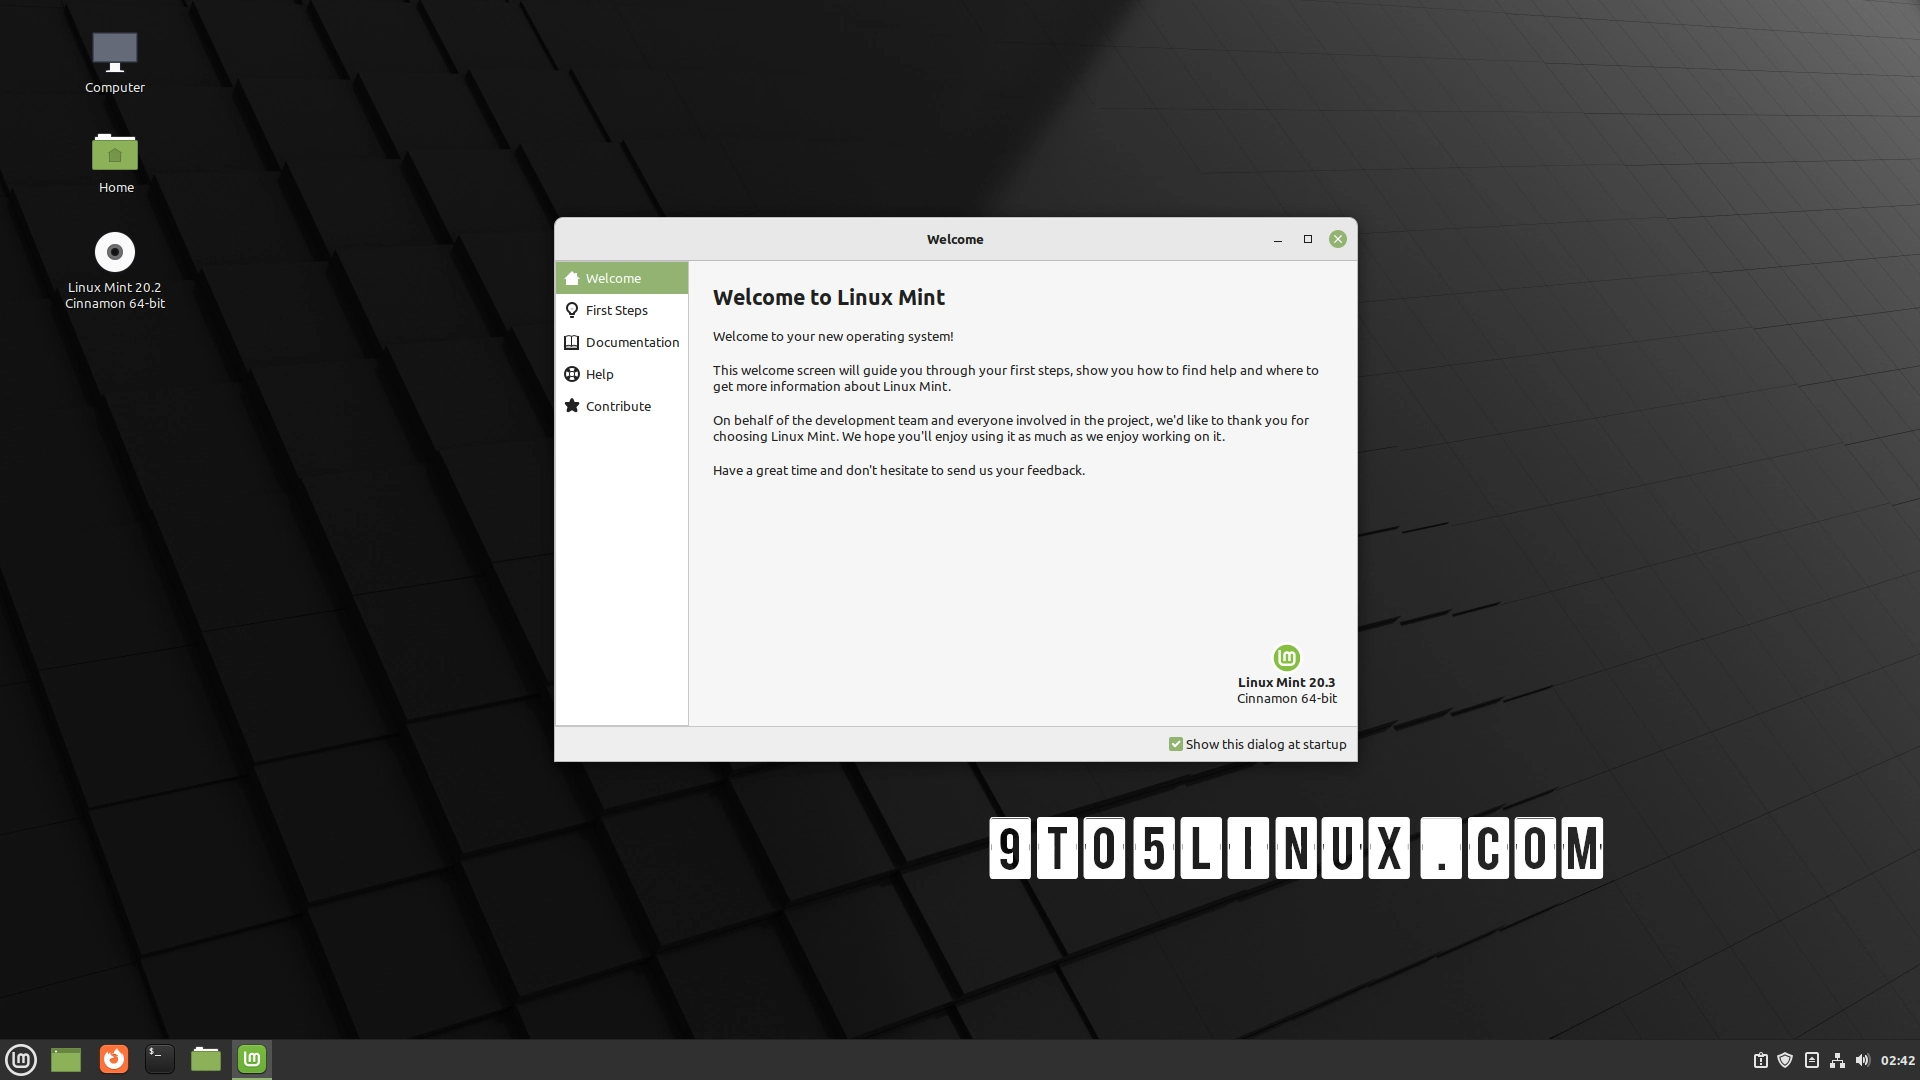 You Can Now Upgrade Linux Mint 20.2 to Linux Mint 20.3, Here’s How